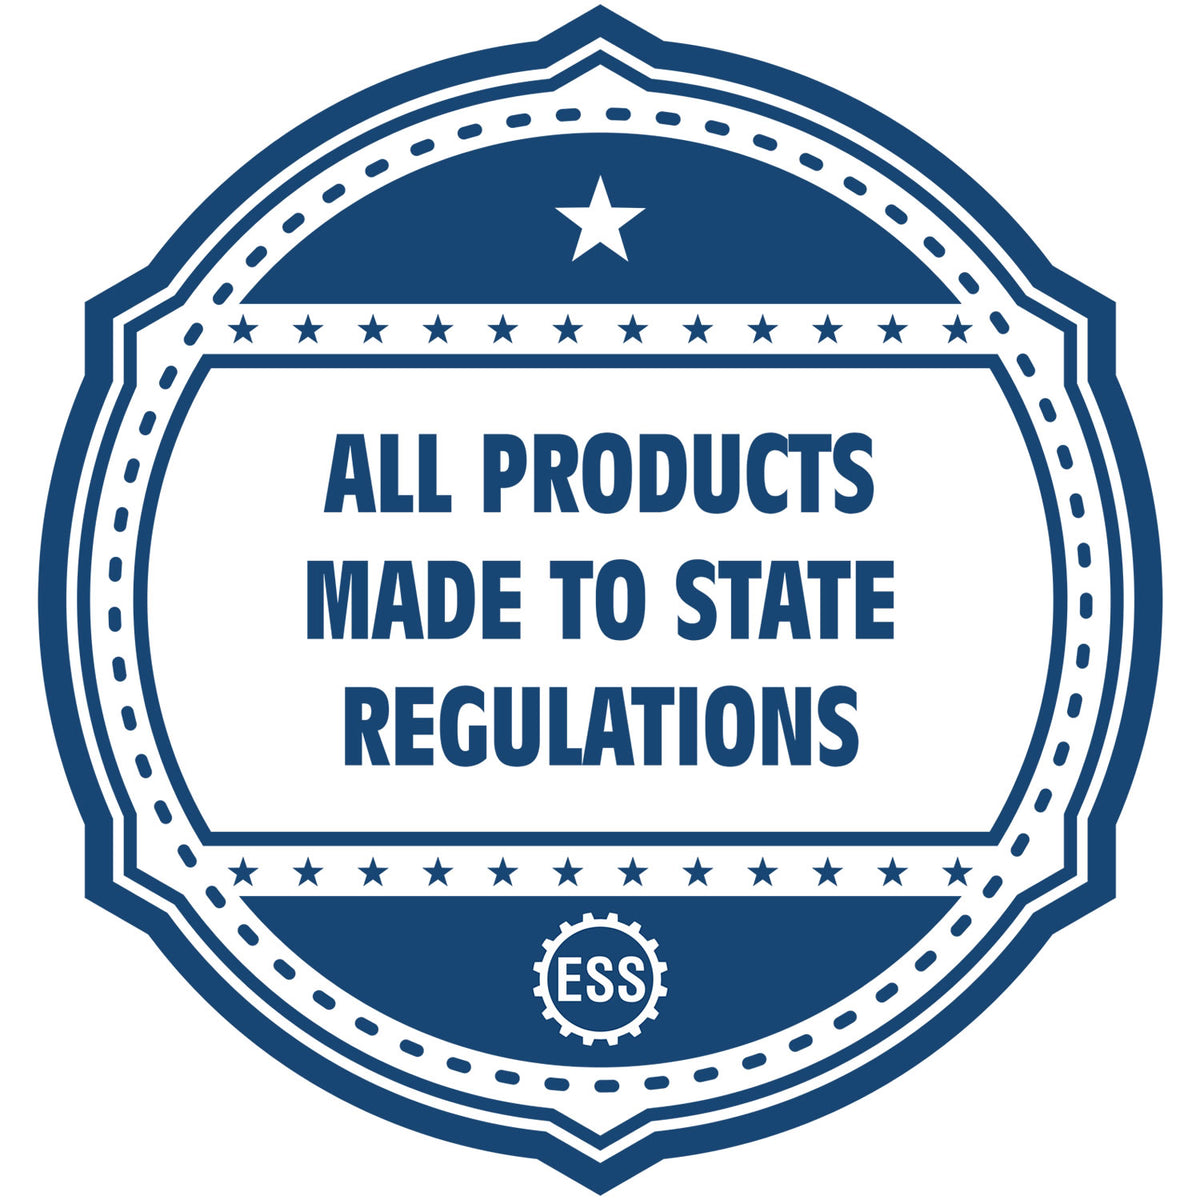 A blue icon or badge for the Slim Pre-Inked Ohio Professional Geologist Seal Stamp showing that this product is made in compliance with state regulations.